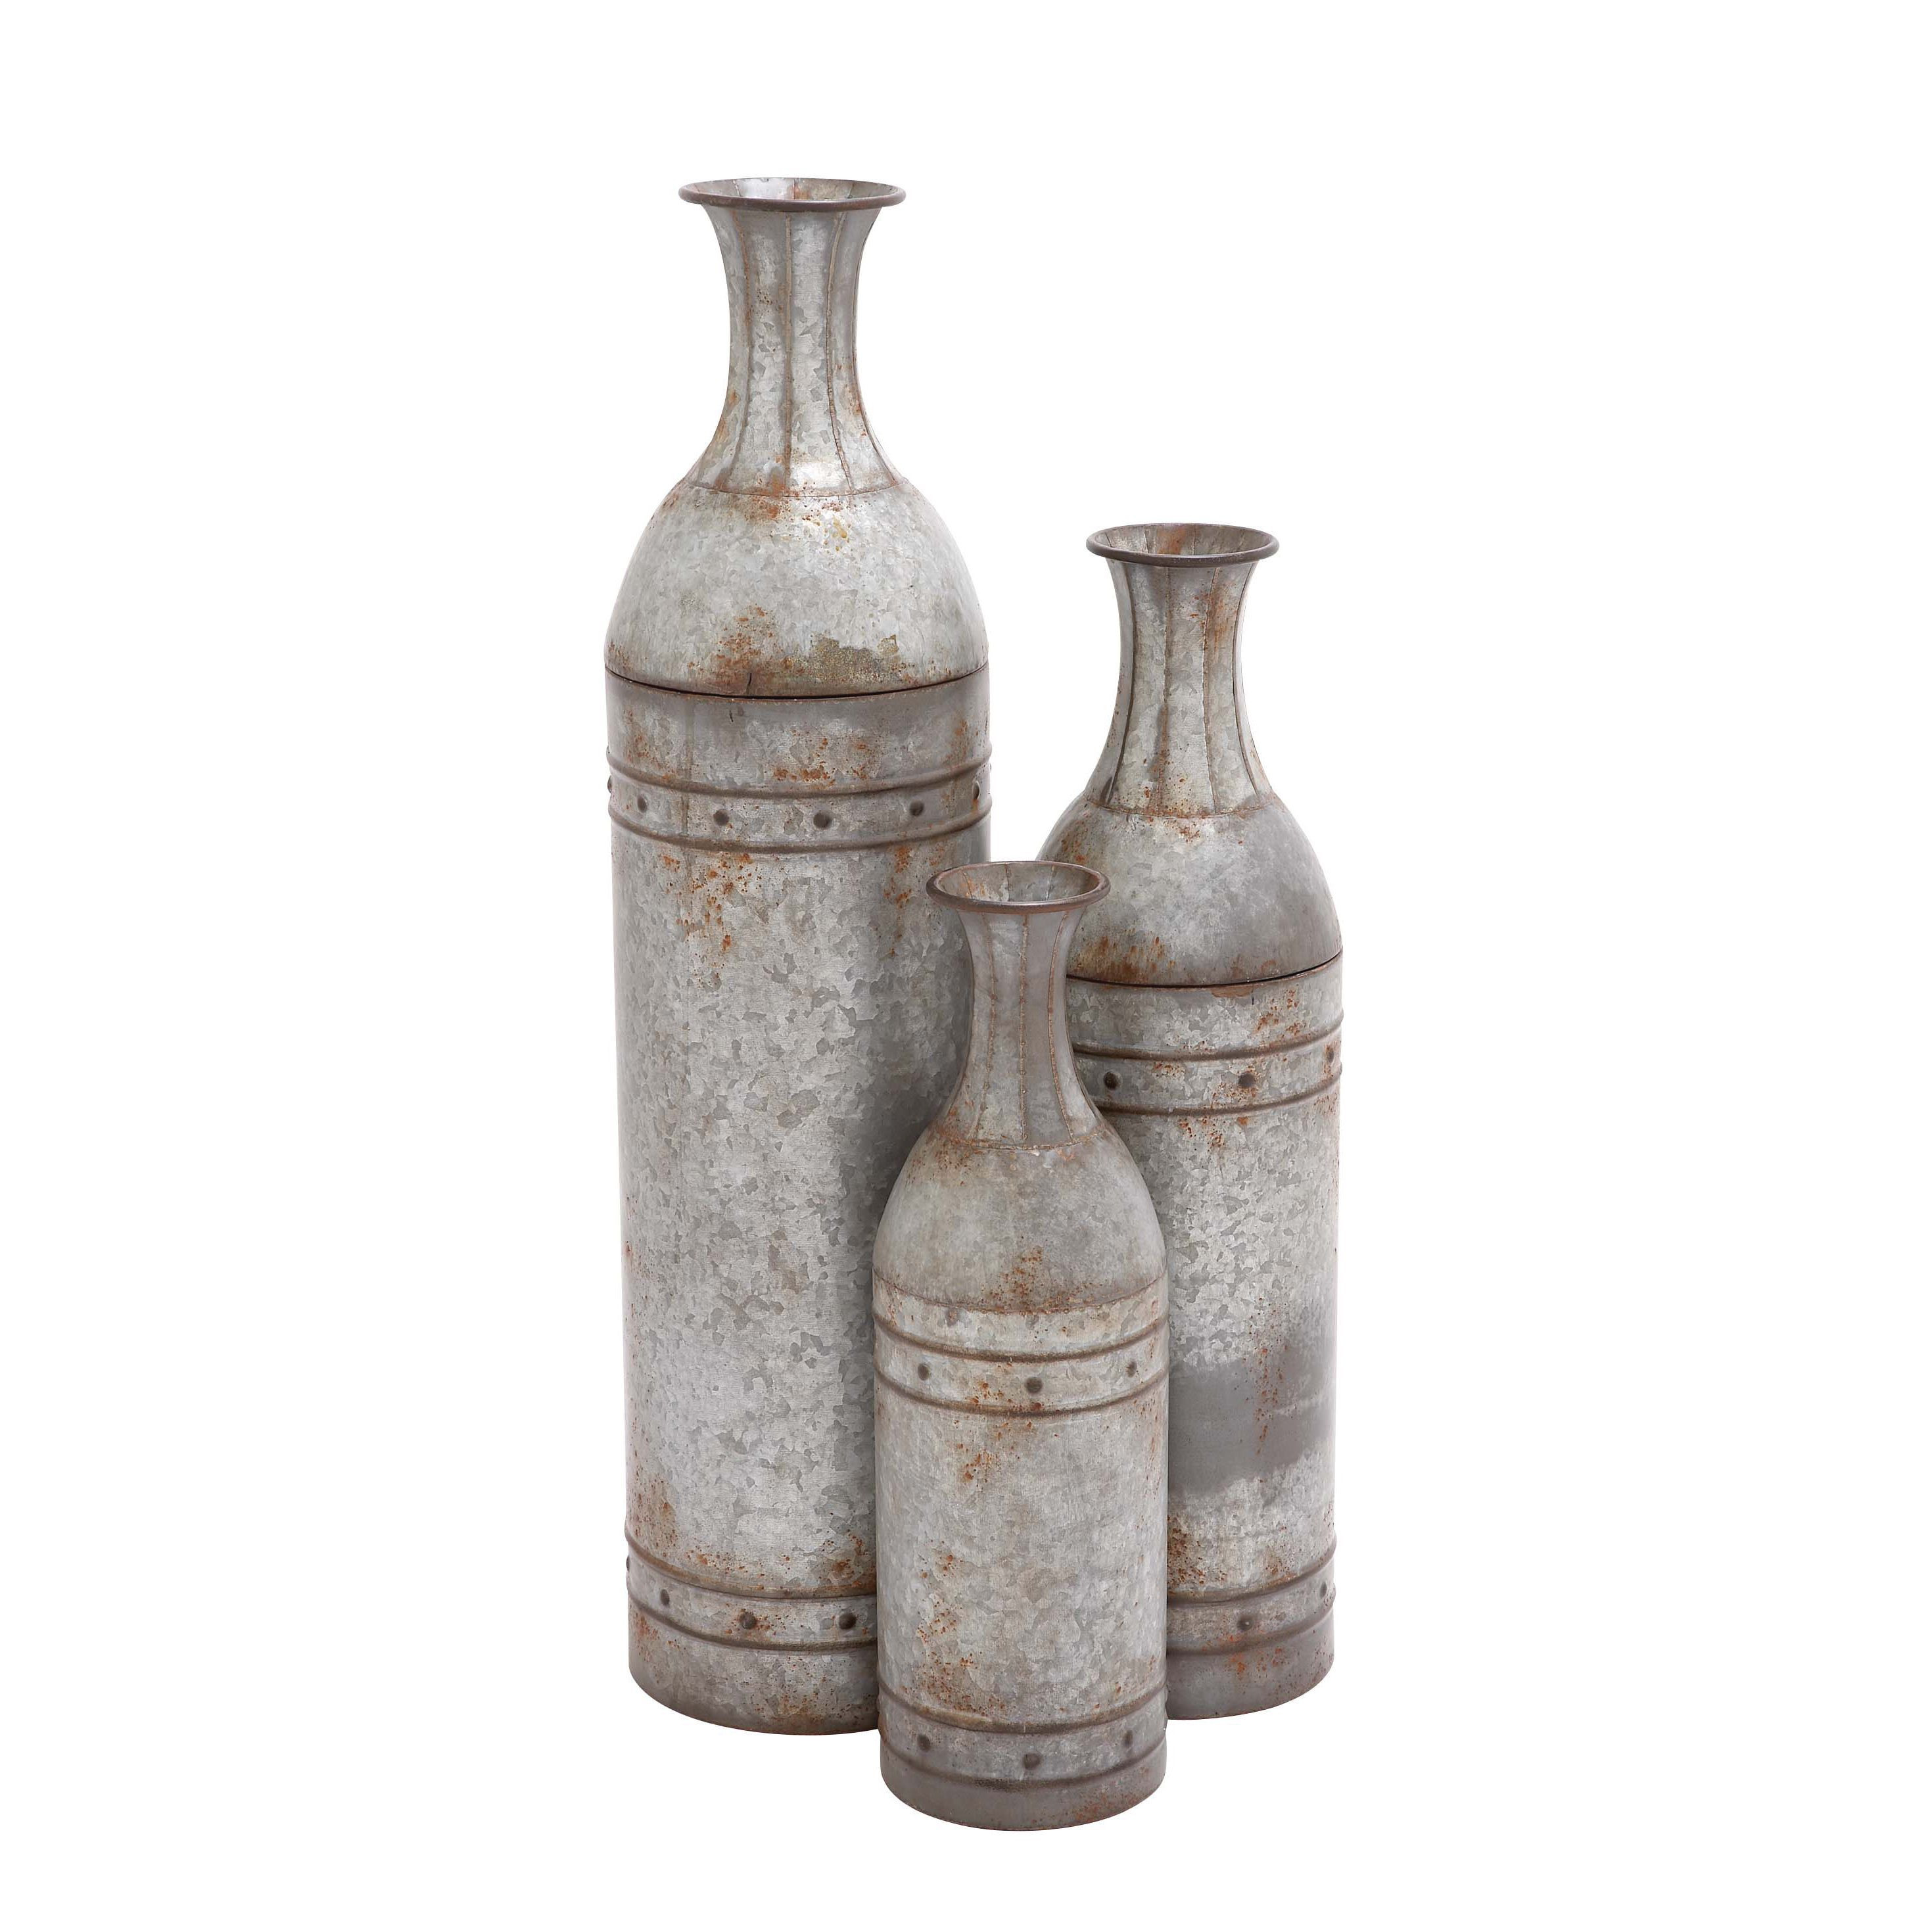 30 Best Cylinder Vases Set Of 3 2024 free download cylinder vases set of 3 of studio 350 metal cylinder vase set of 3 grey iron products throughout studio 350 metal cylinder vase set of 3 grey iron